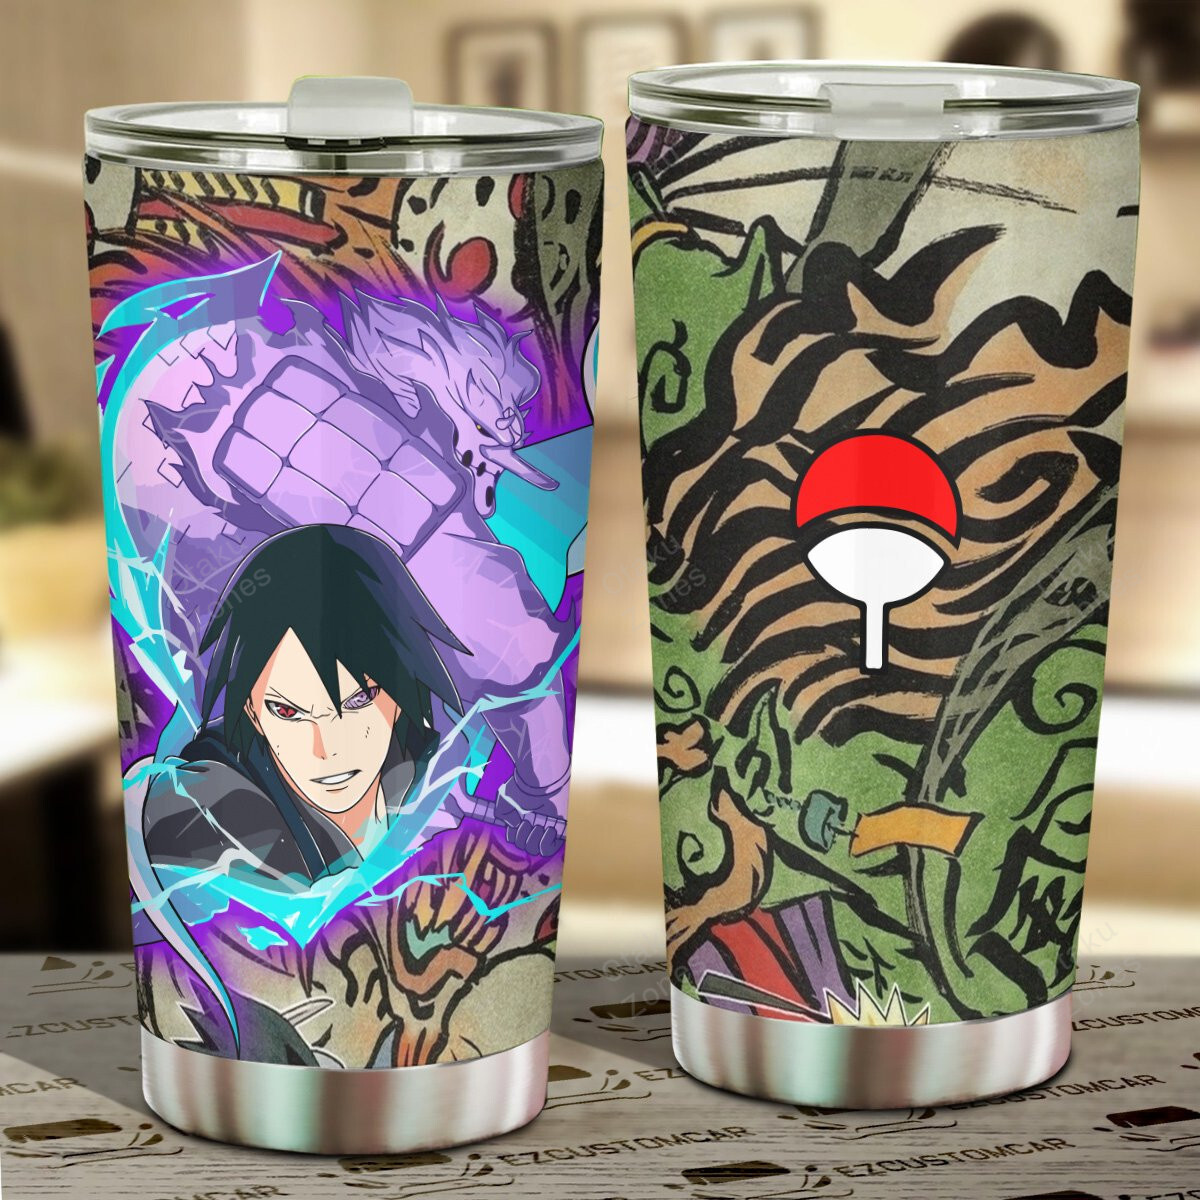 Go ahead and order your new tumbler now! 52